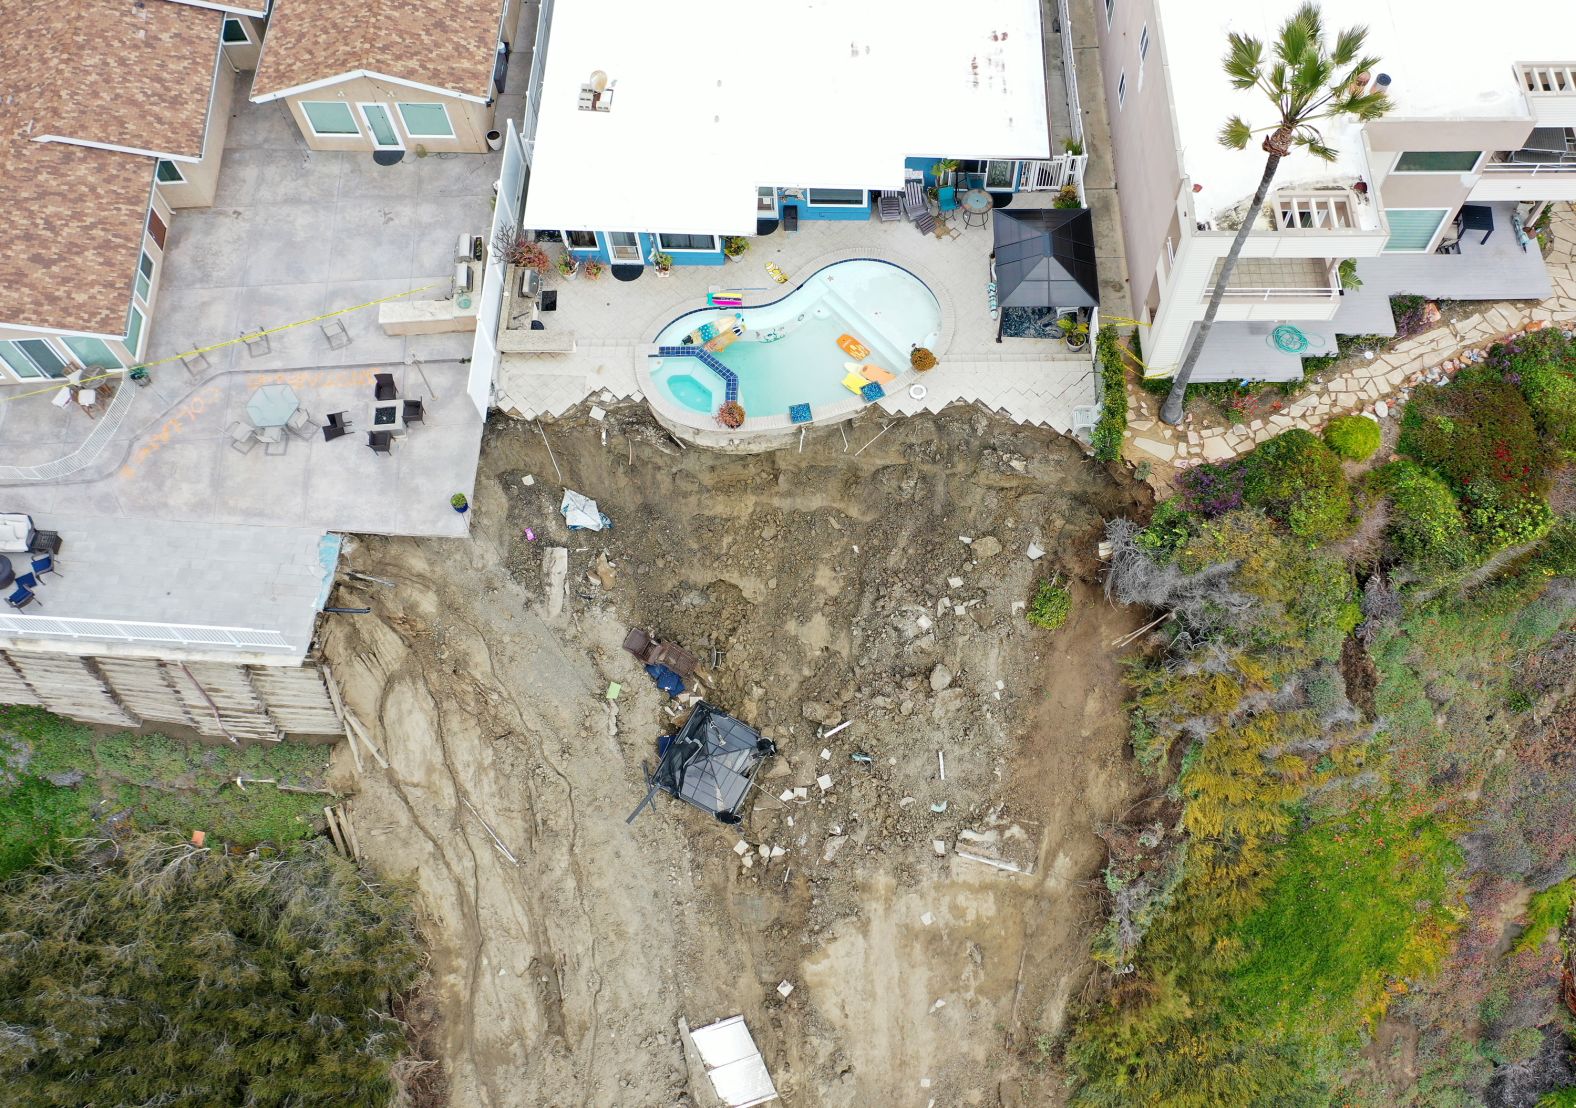 A swimming pool sits on the edge of a cliff Thursday, March 16, following a landslide in San Clemente, California. As storms have pummeled the state in quick succession since late December, more soil has become oversaturated and <a href="index.php?page=&url=https%3A%2F%2Fwww.cnn.com%2F2023%2F03%2F21%2Fus%2Fcalifornia-weather-atmospheric-river-drought-climate%2Findex.html" target="_blank">vulnerable to flooding and mudslides</a>.